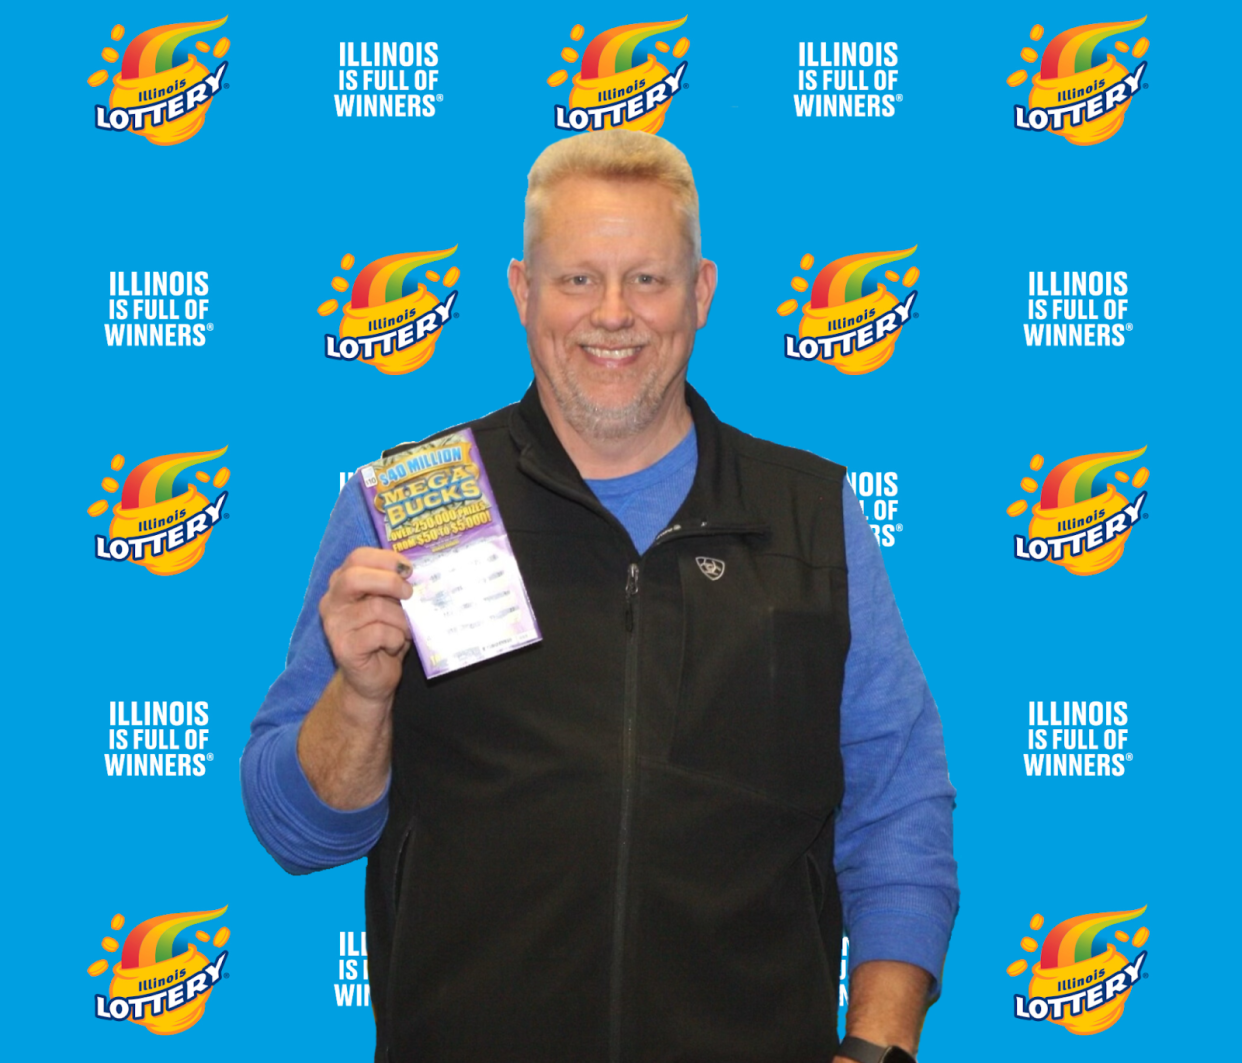 Kevin Weaver of Fairview, Illinois, won $1 million on a scratch-off lottery ticket he bought at County Market in Farmington.